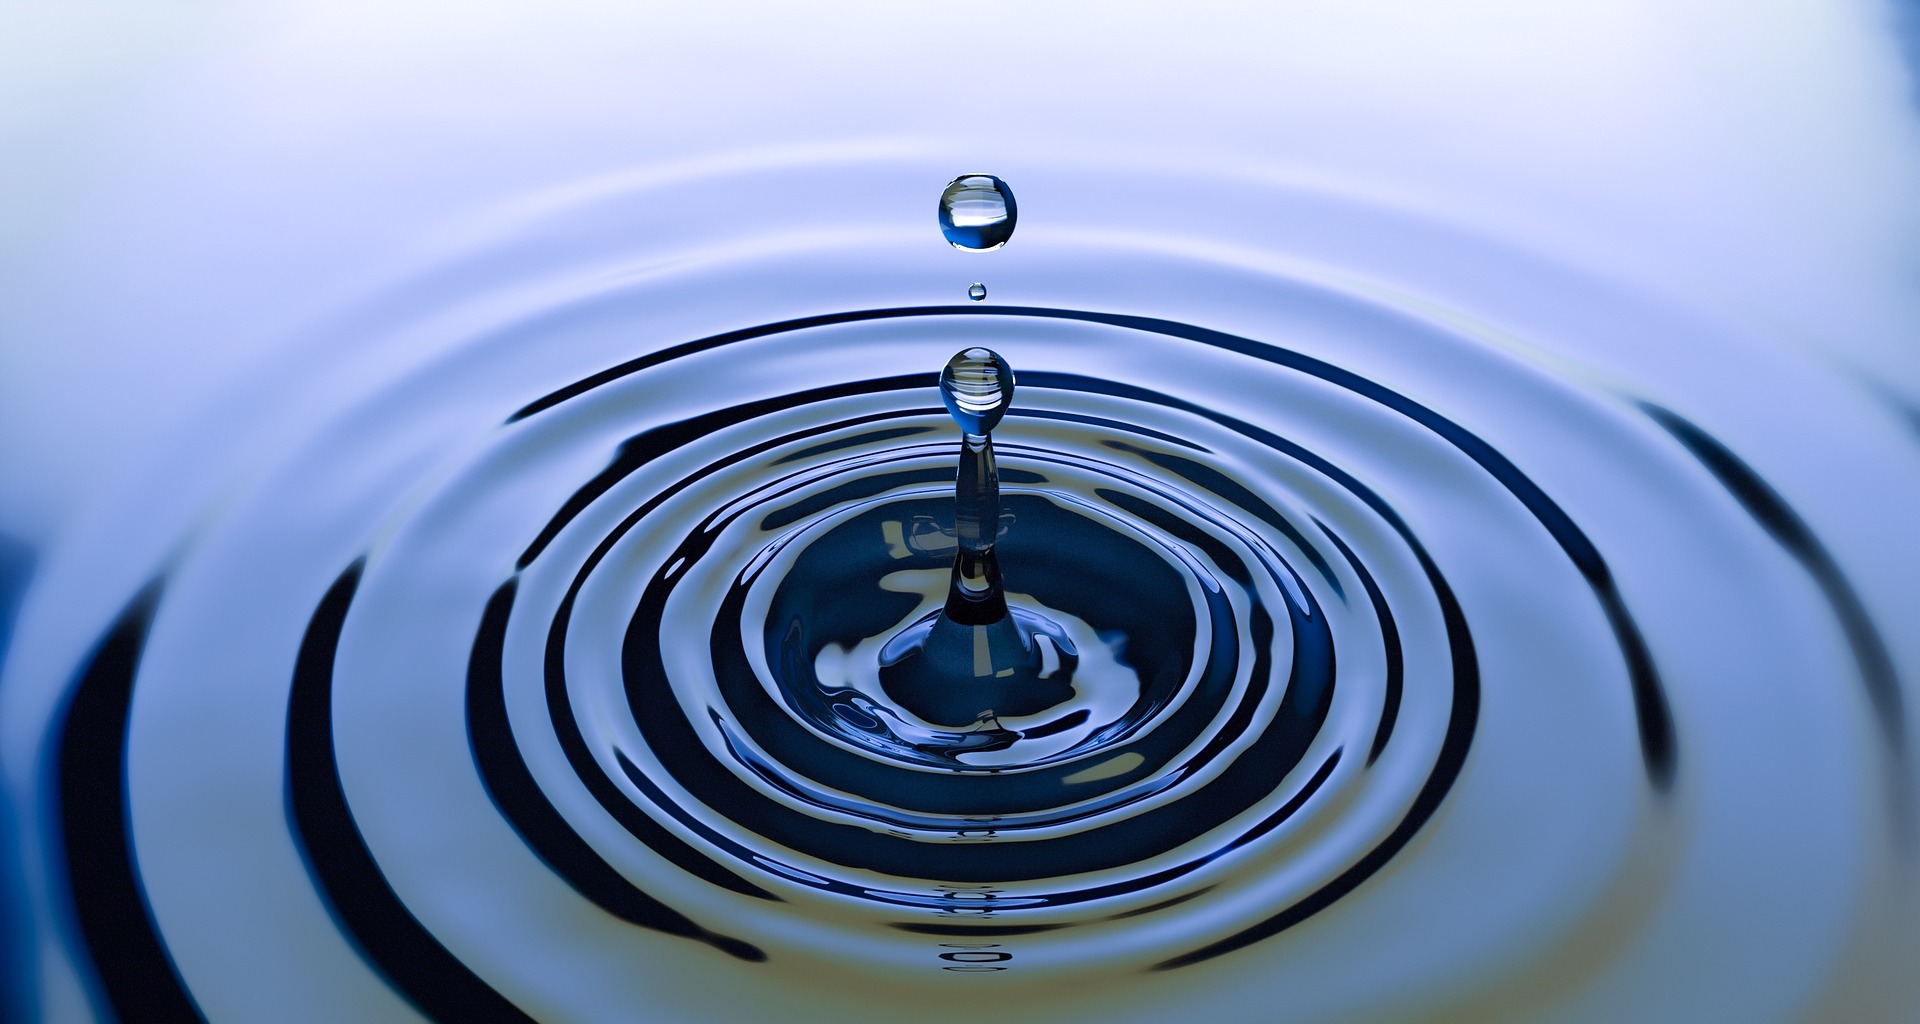 A water drop falls in a body of water, leaving a ripple effect.